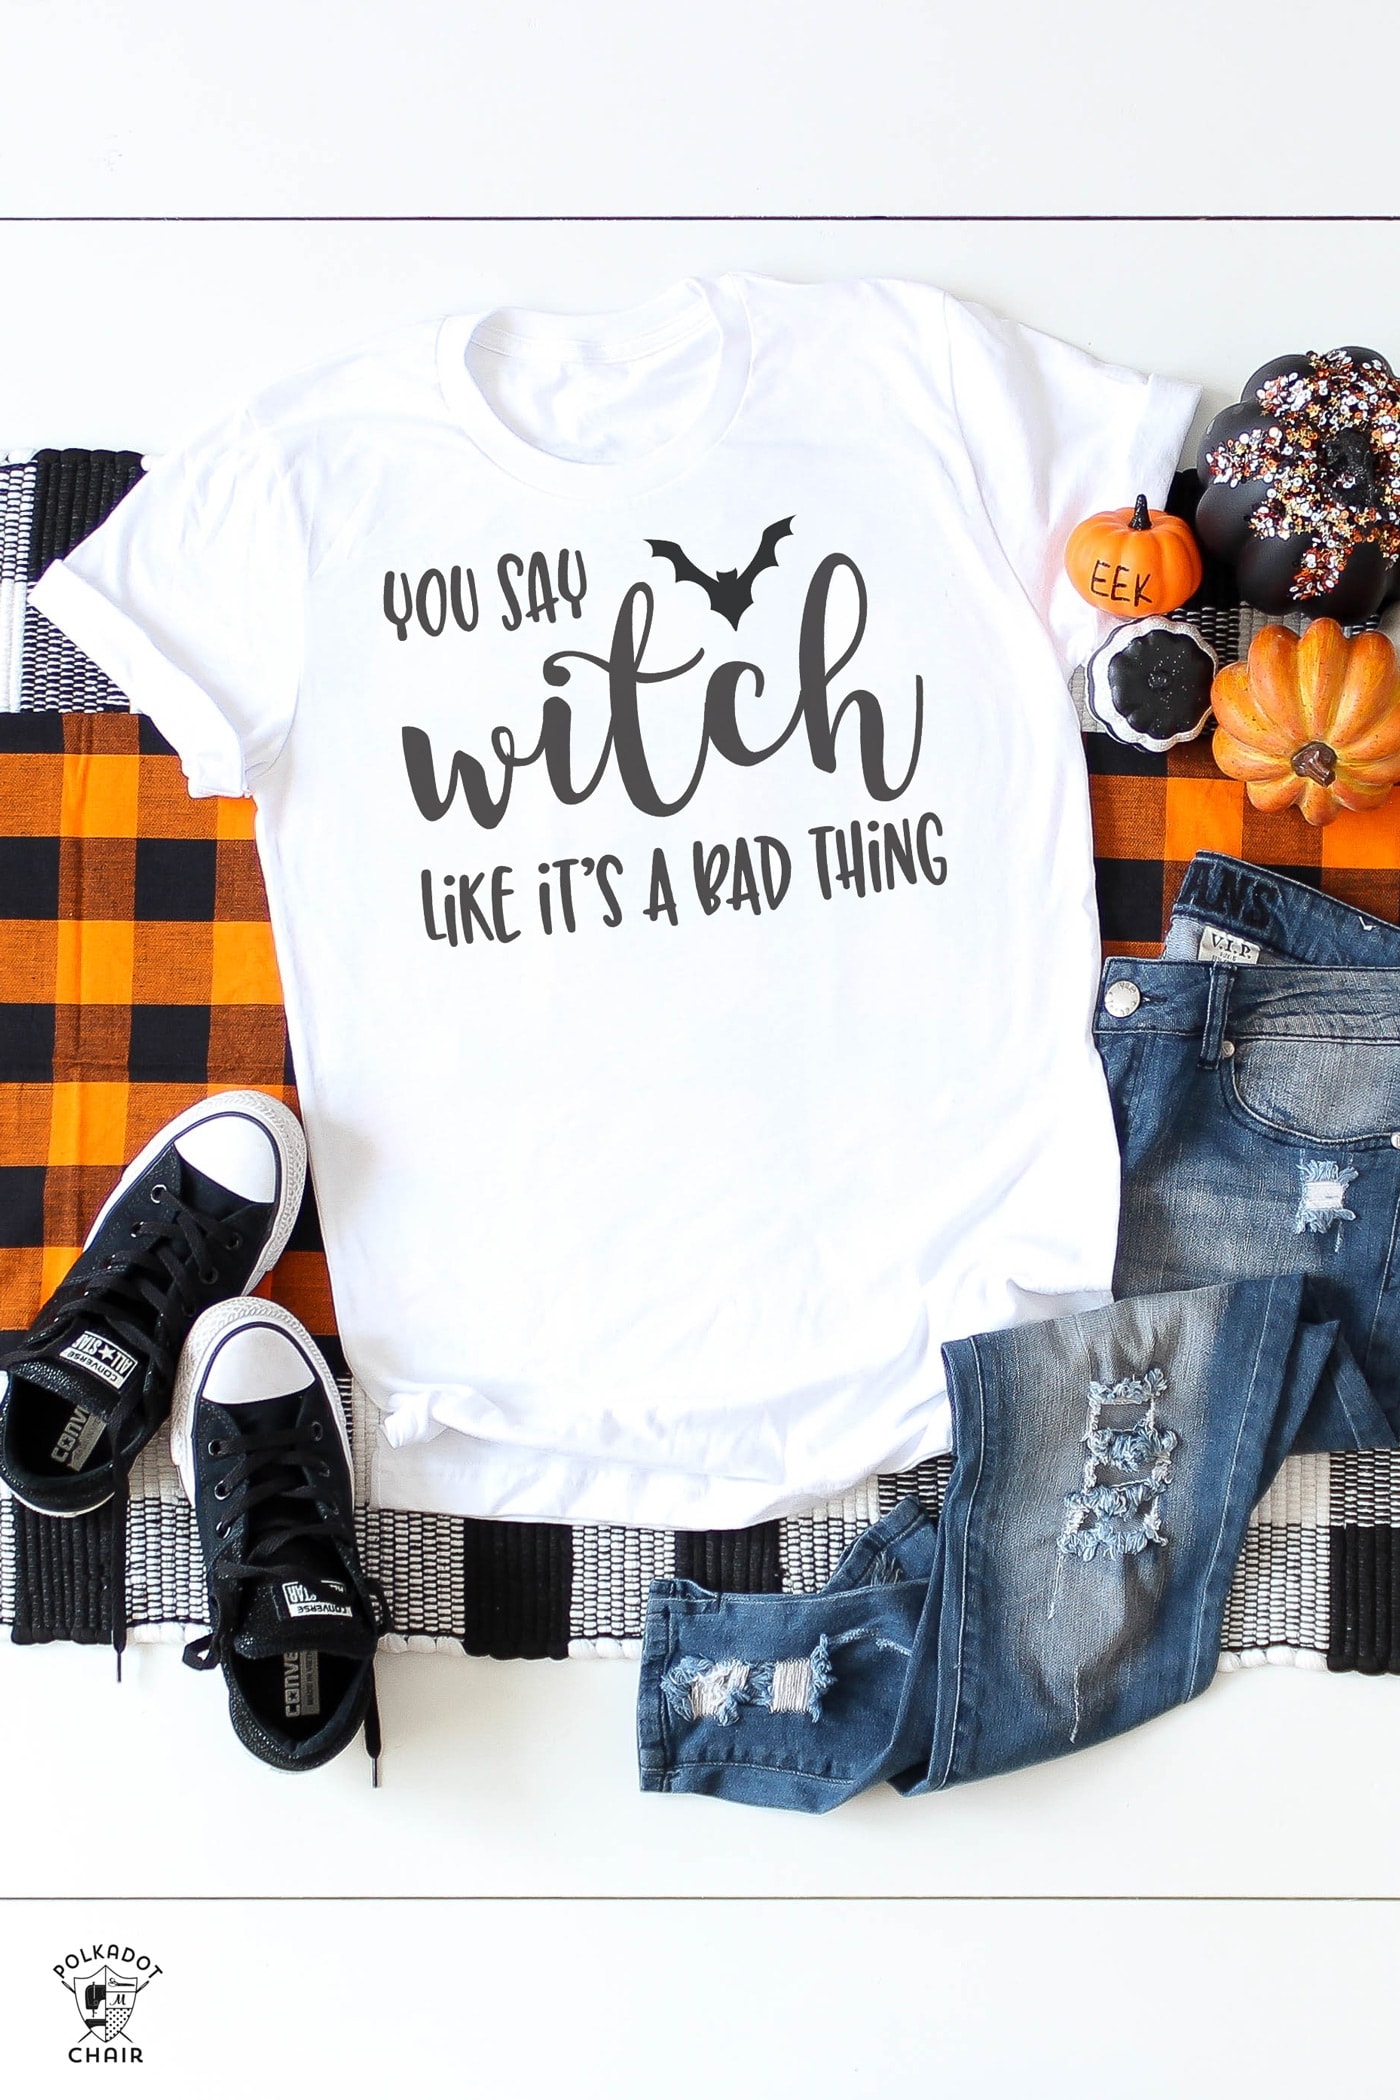 Download Cute Halloween Sayings & Cricut SVG Files for T-shirts, Mugs, or Pillows